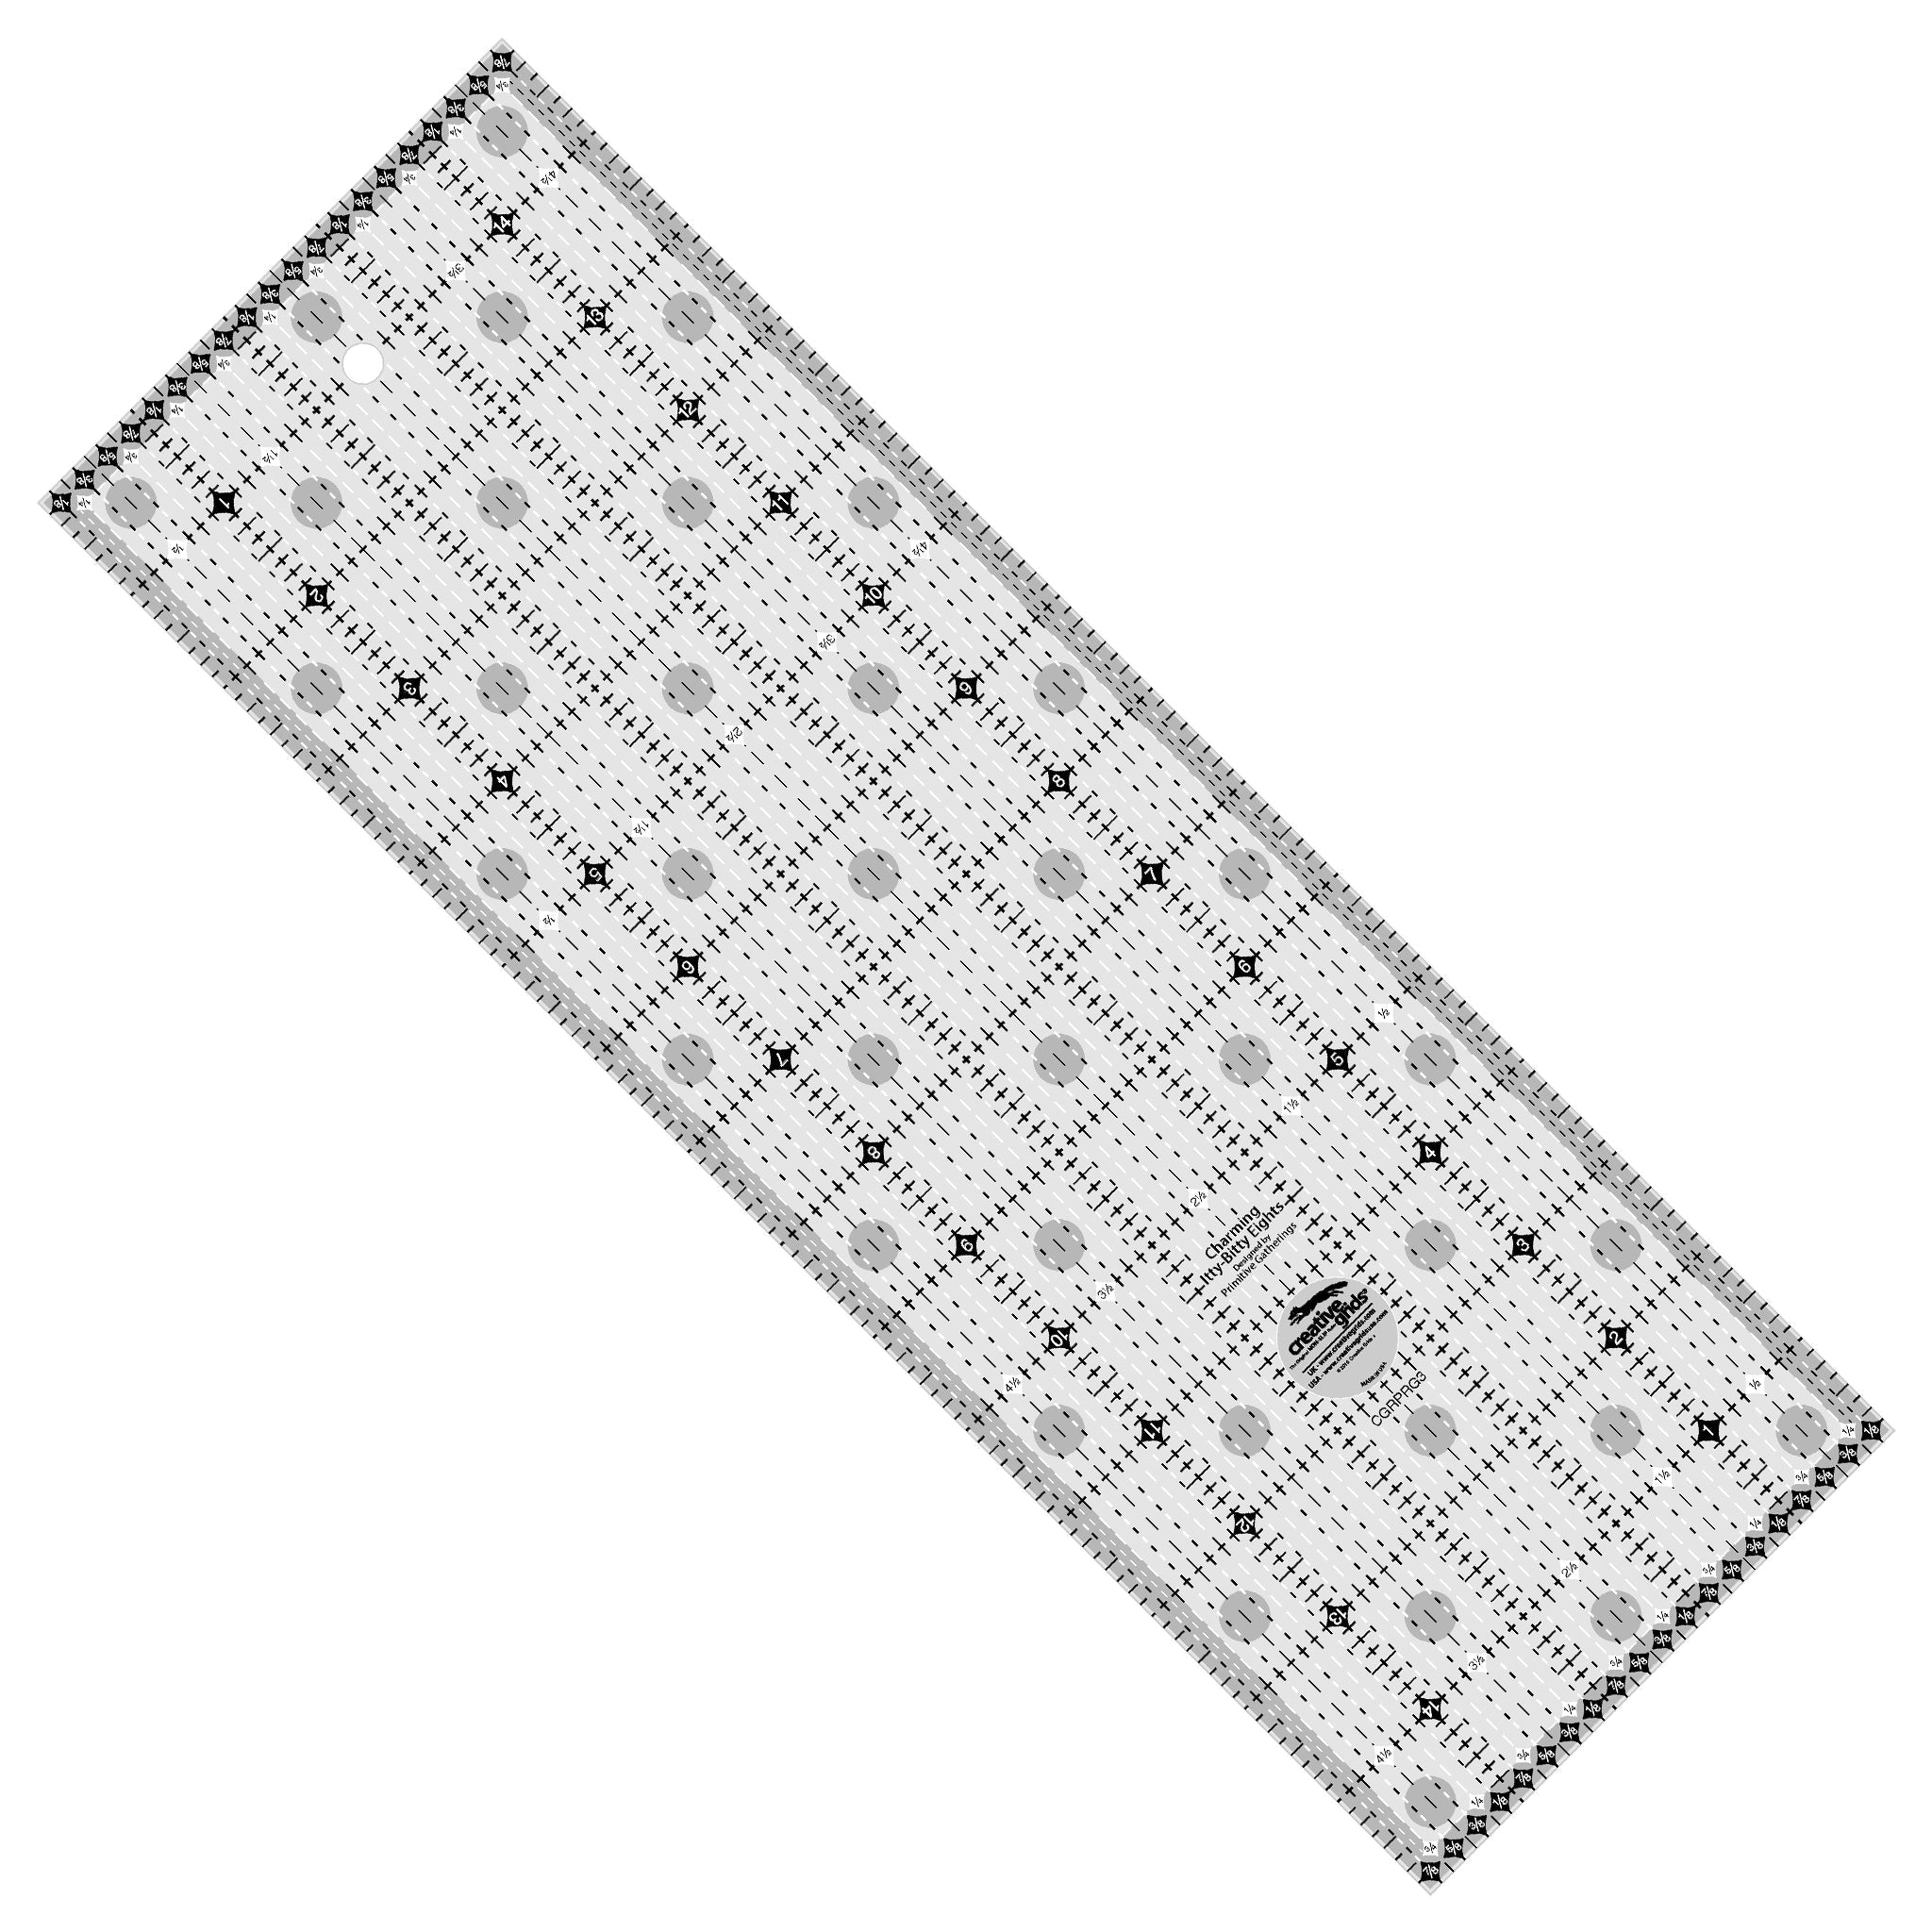 Creative Grids Charming Itty Bitty Eights 5-inch x 15-inch Quilt Ruler (CGRPRG3)